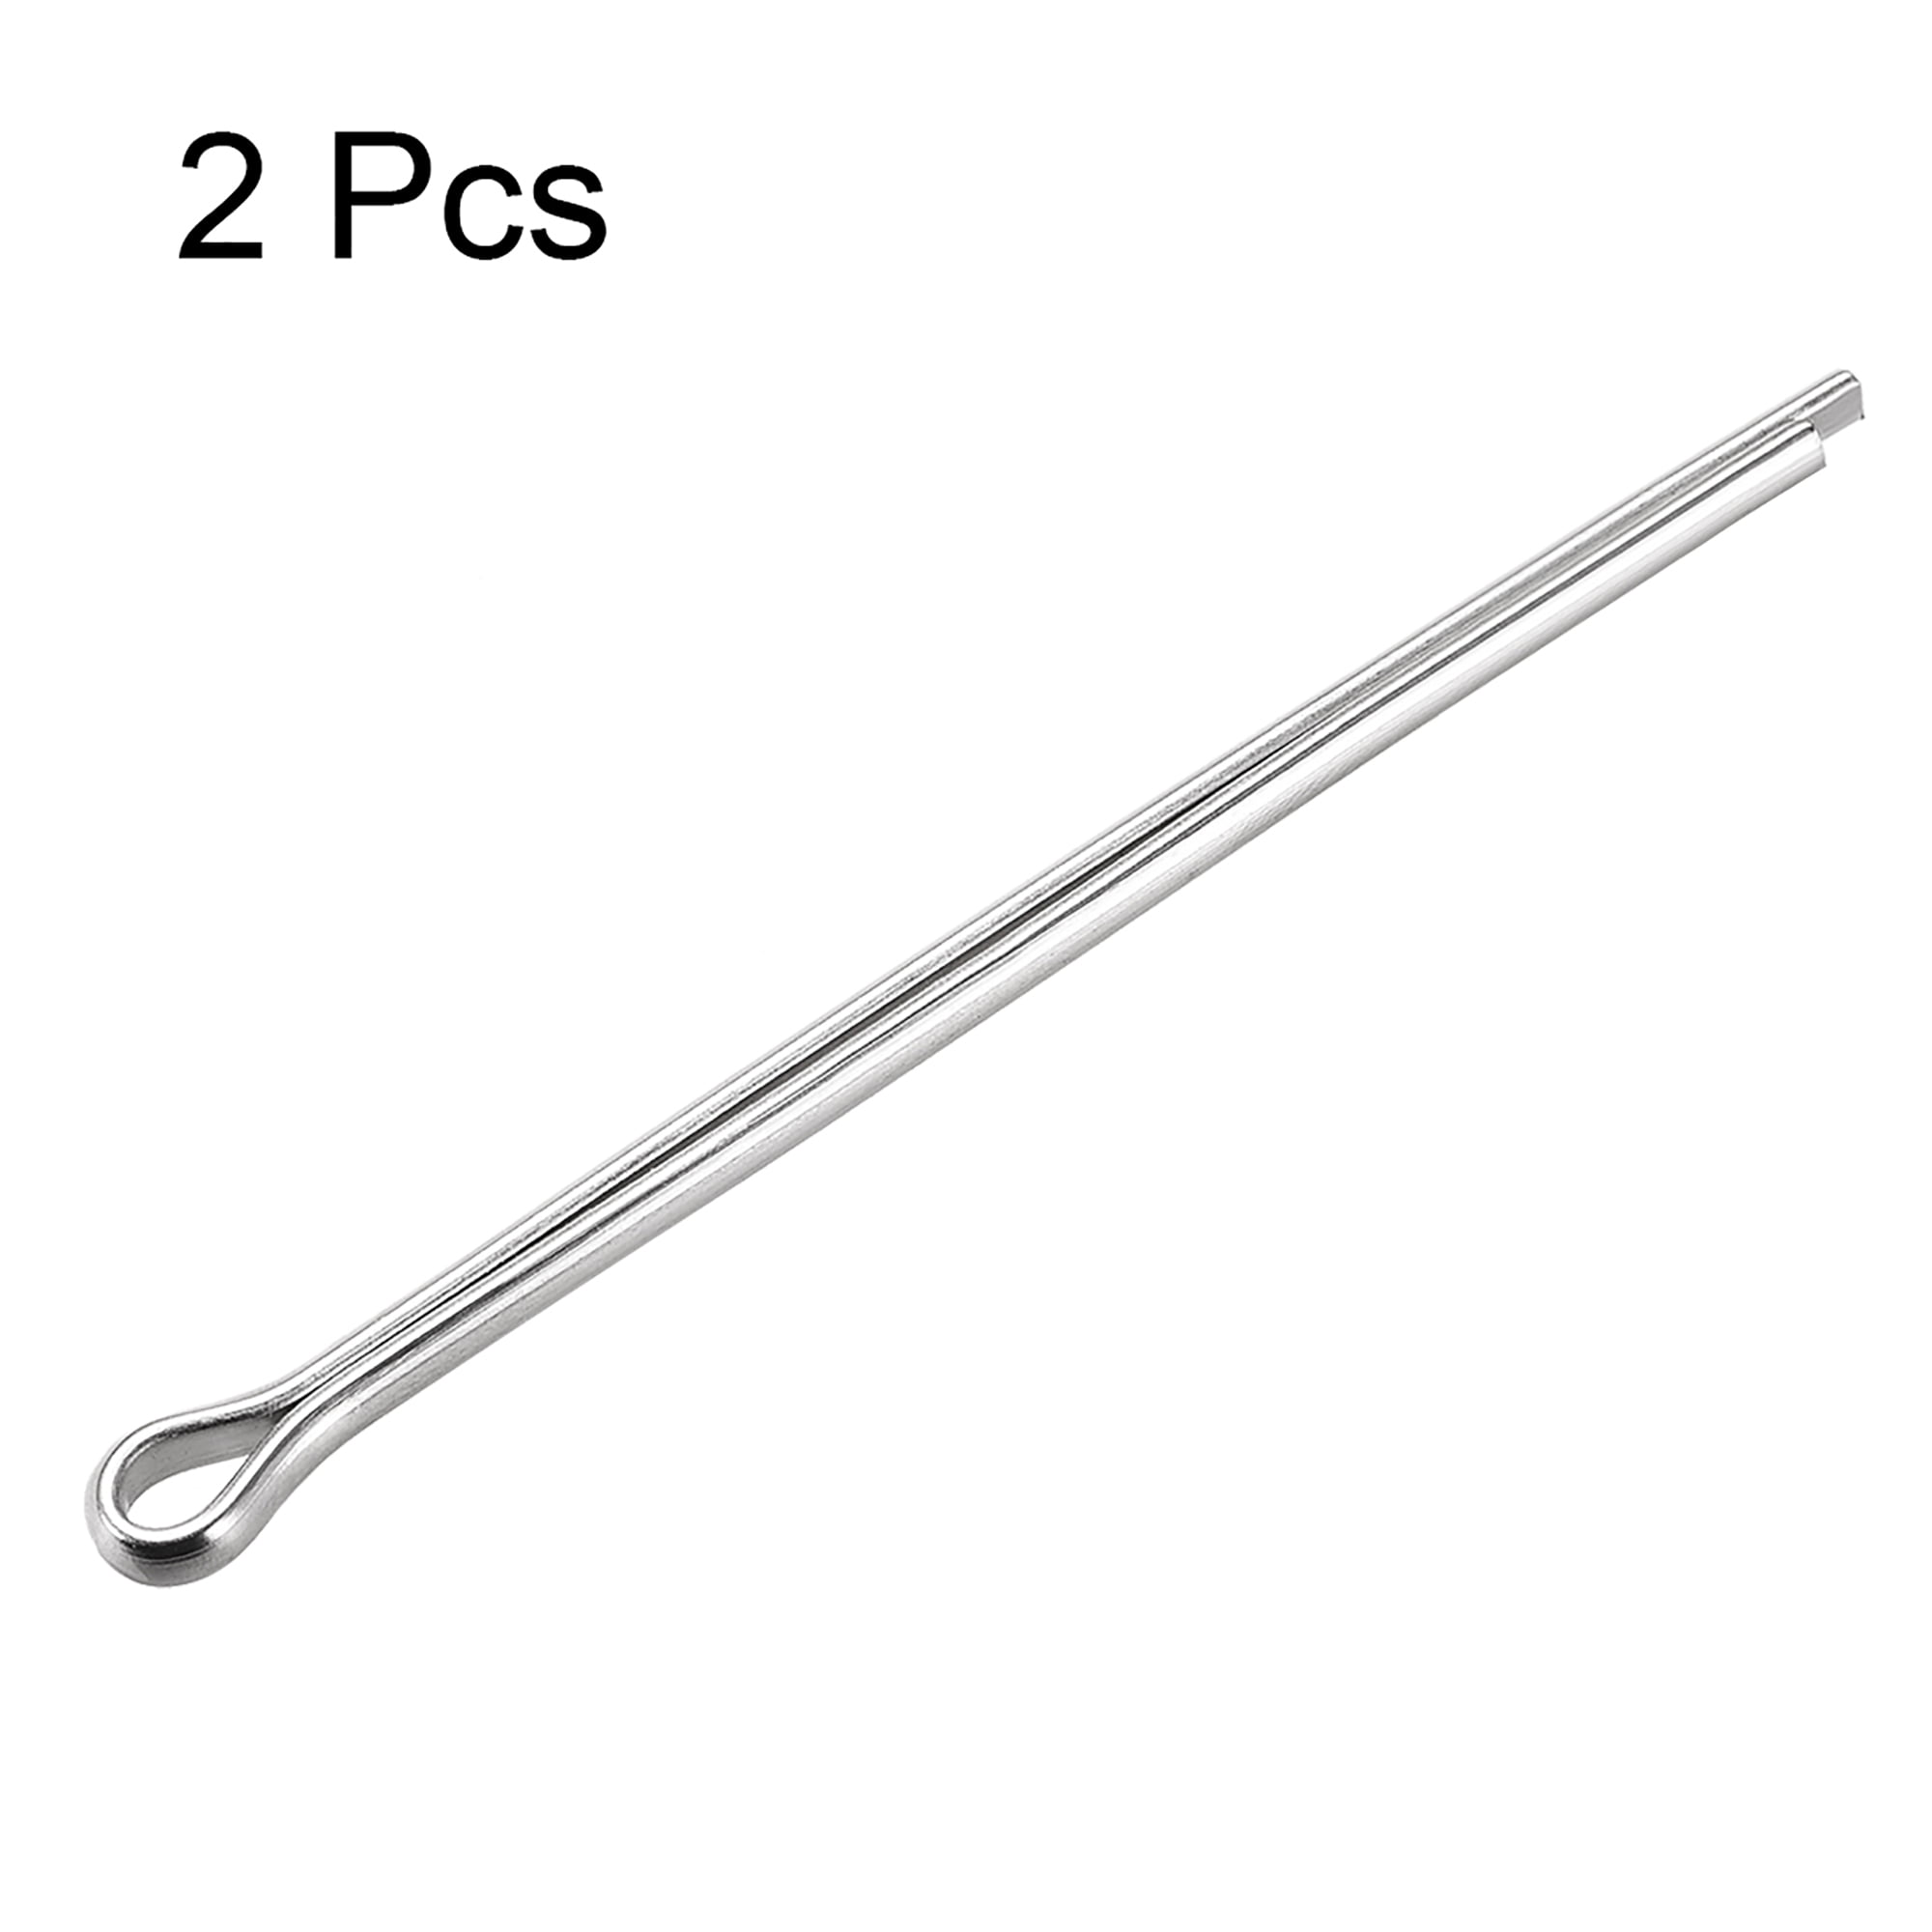 5mm x 100mm 304 Stainless Steel 2-Prongs Silver Tone 2Pcs Split Cotter Pin 